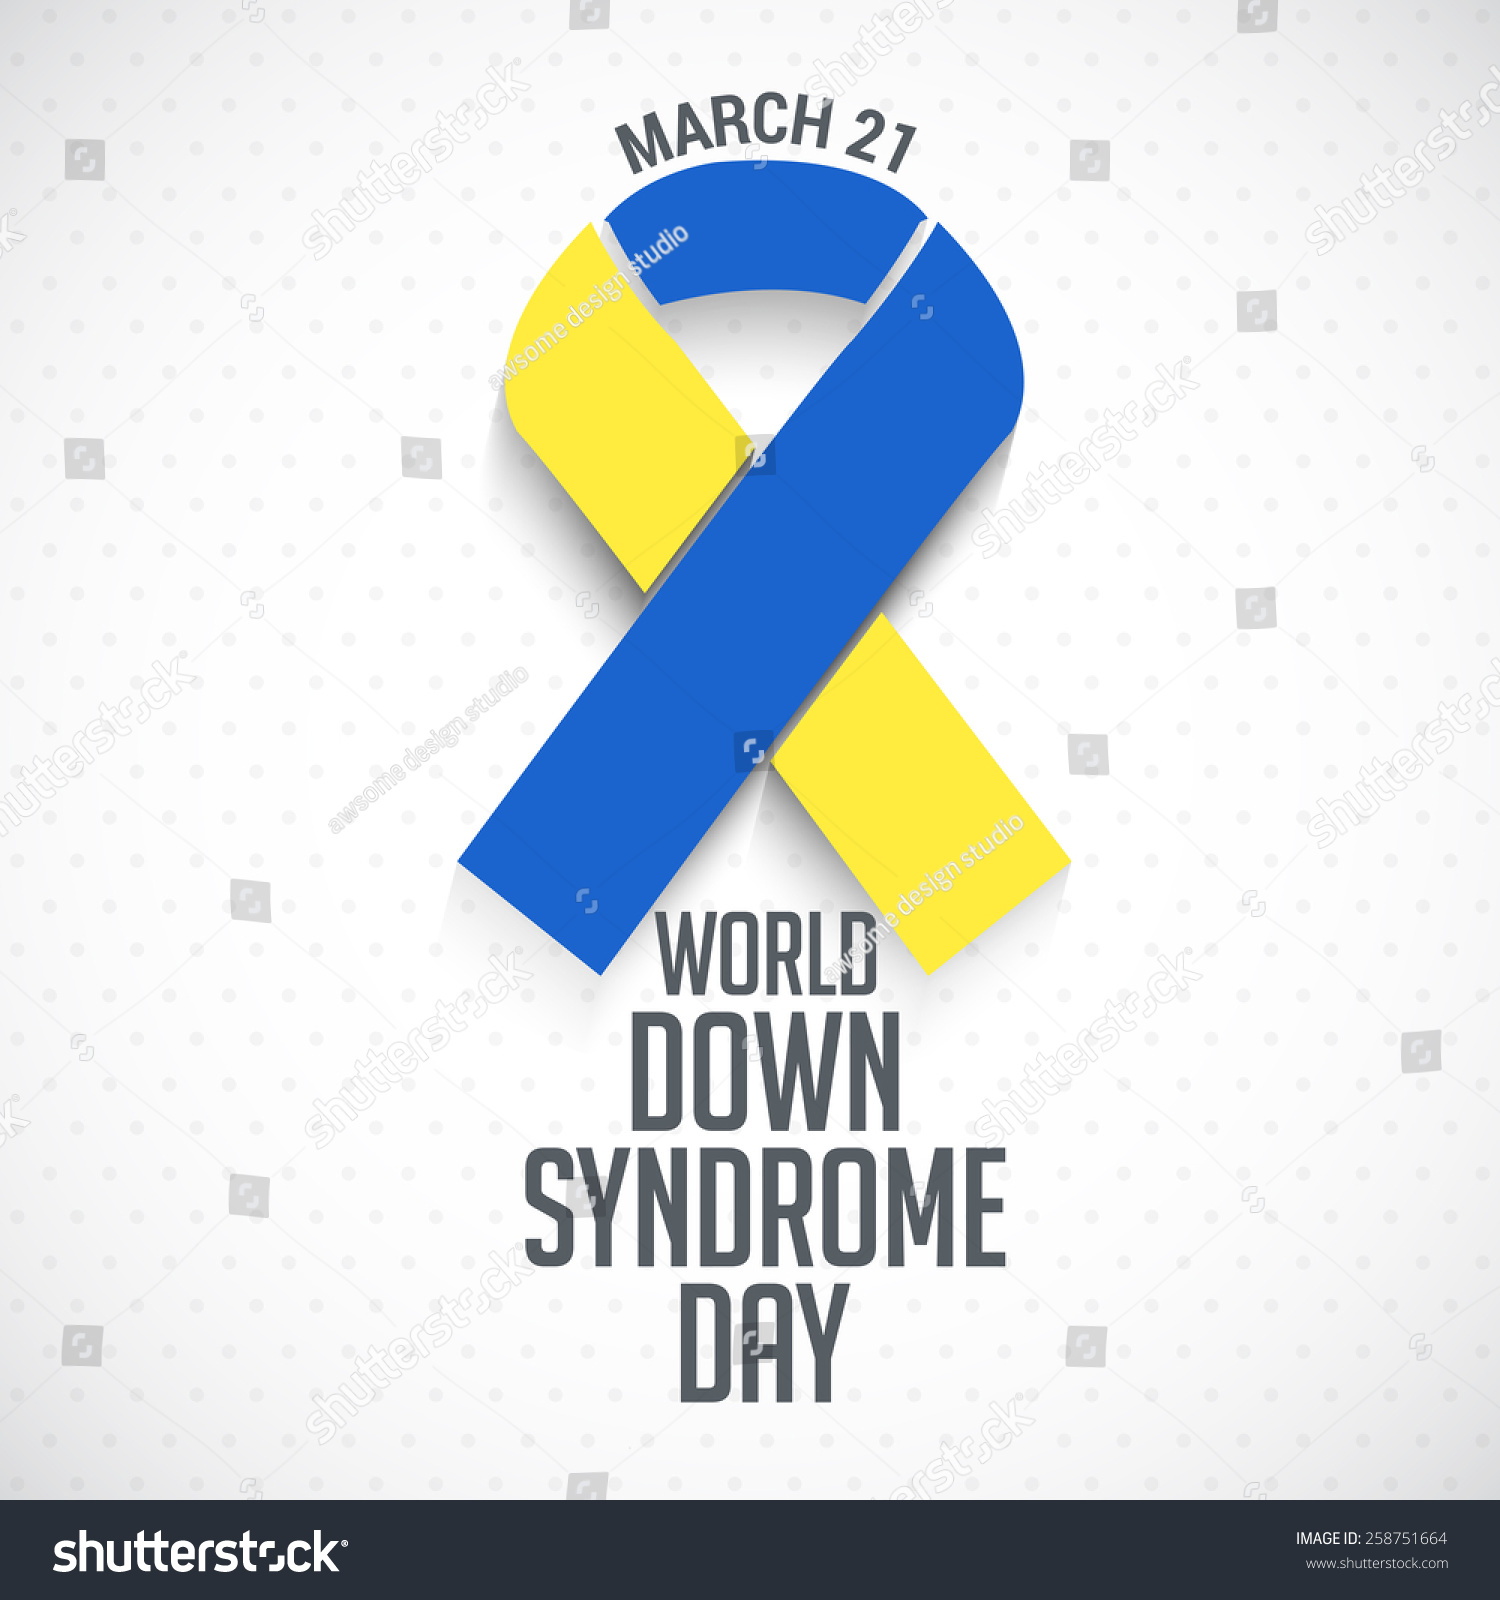 World Down Syndrome Day Stock Vector 258751664 - Shutterstock